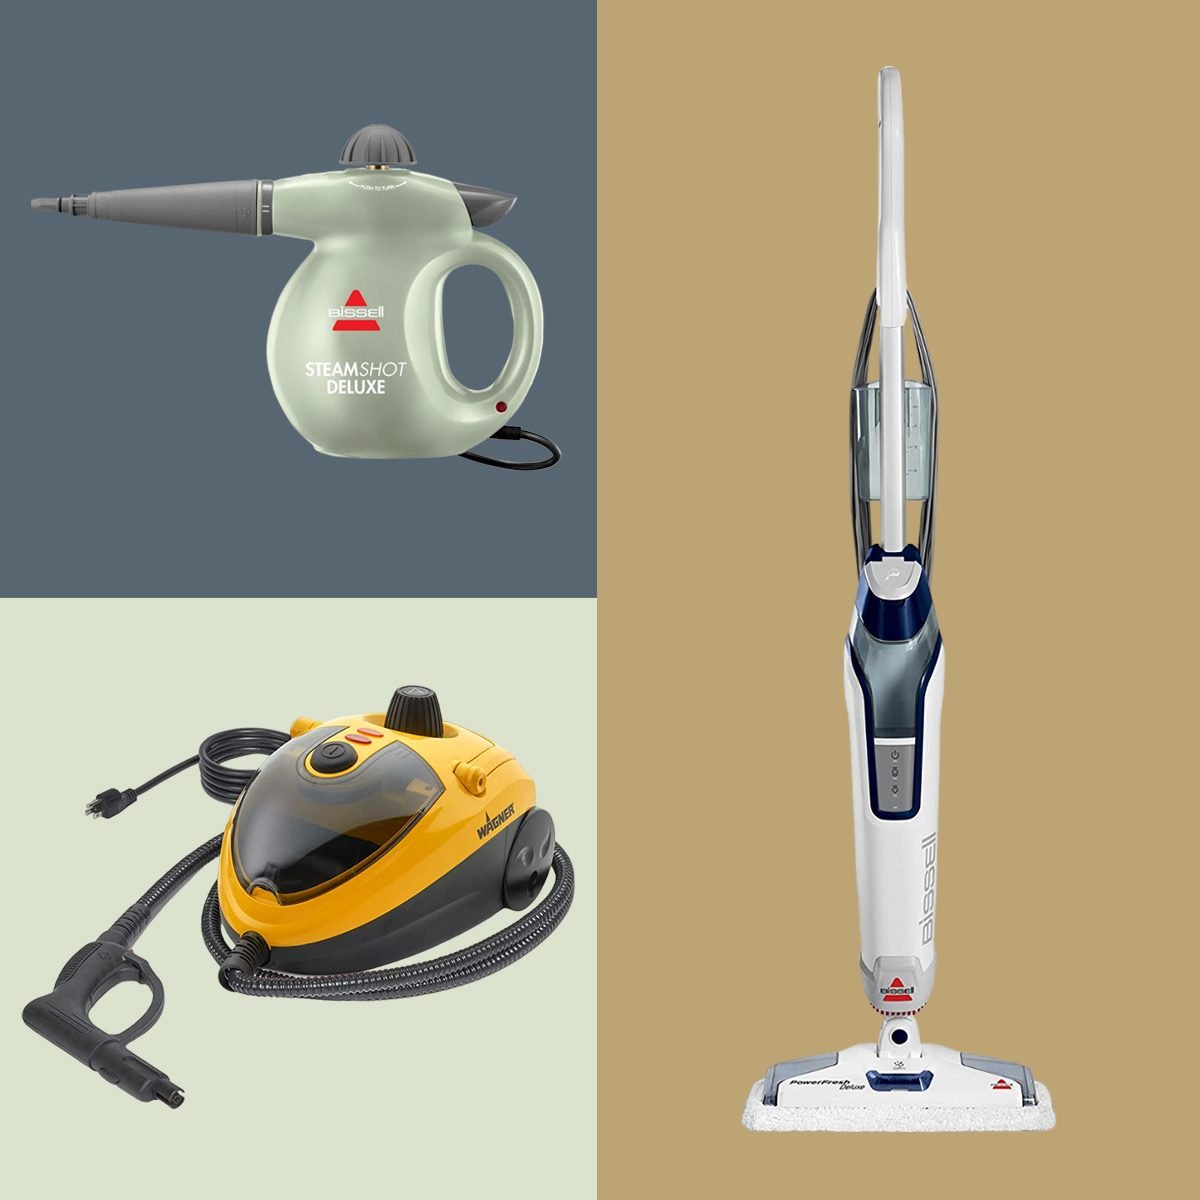 https://www.rd.com/wp-content/uploads/2023/06/The-6-Best-Steam-Cleaner-Picks-of-2023-According-to-Cleaning-Experts1_FT_via-amazzon.com_.jpg